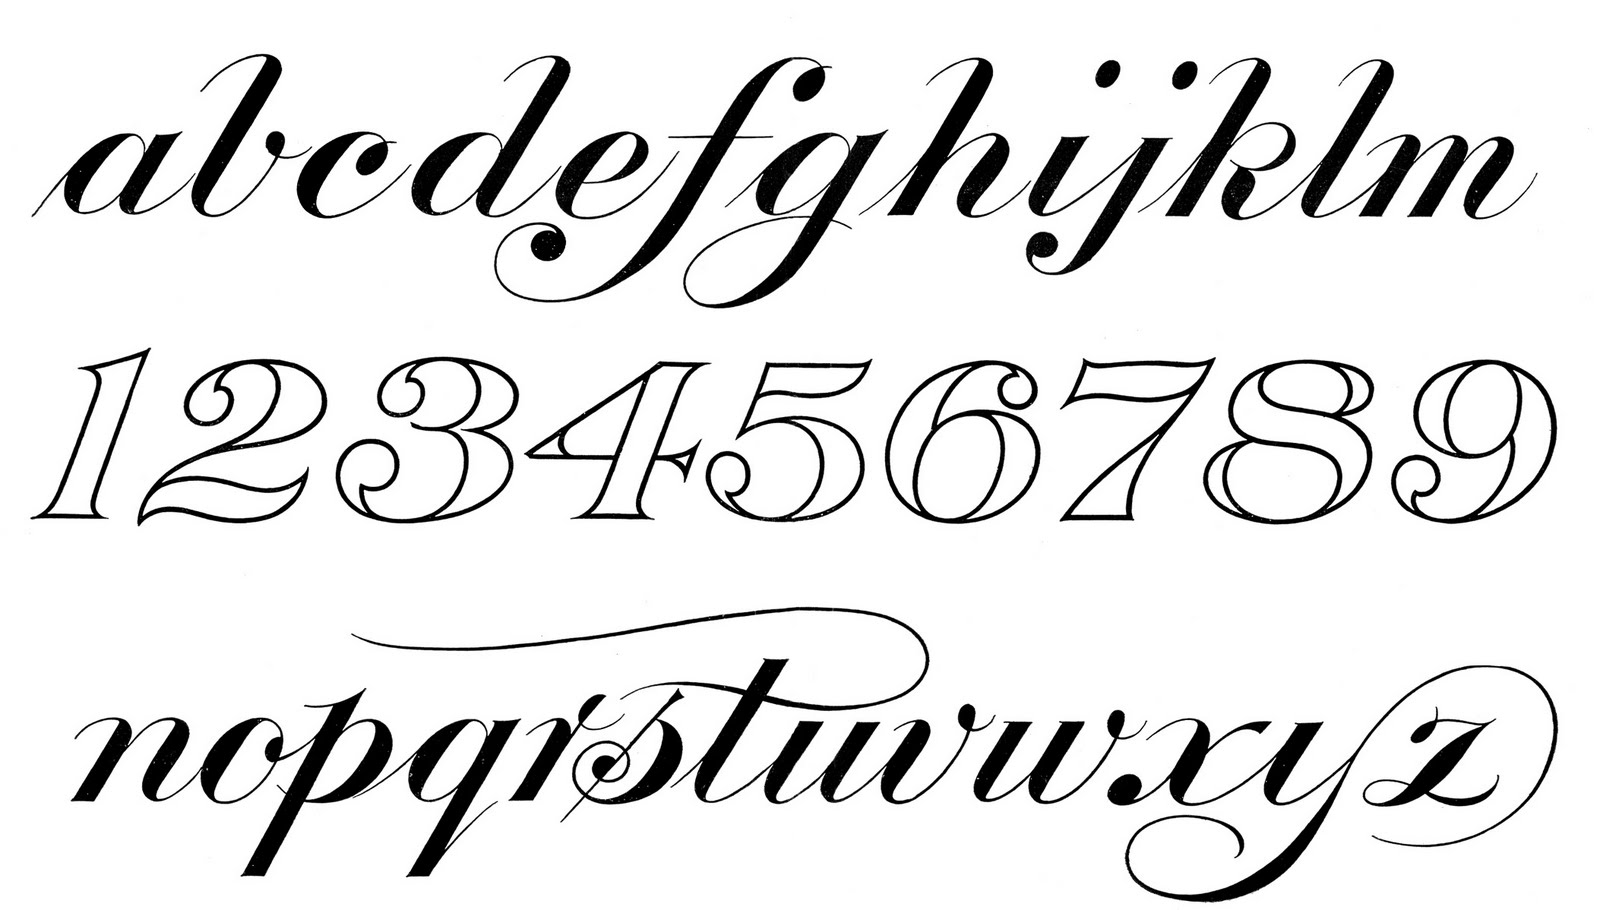 3. Old English Number Fonts for Tattoos - wide 6